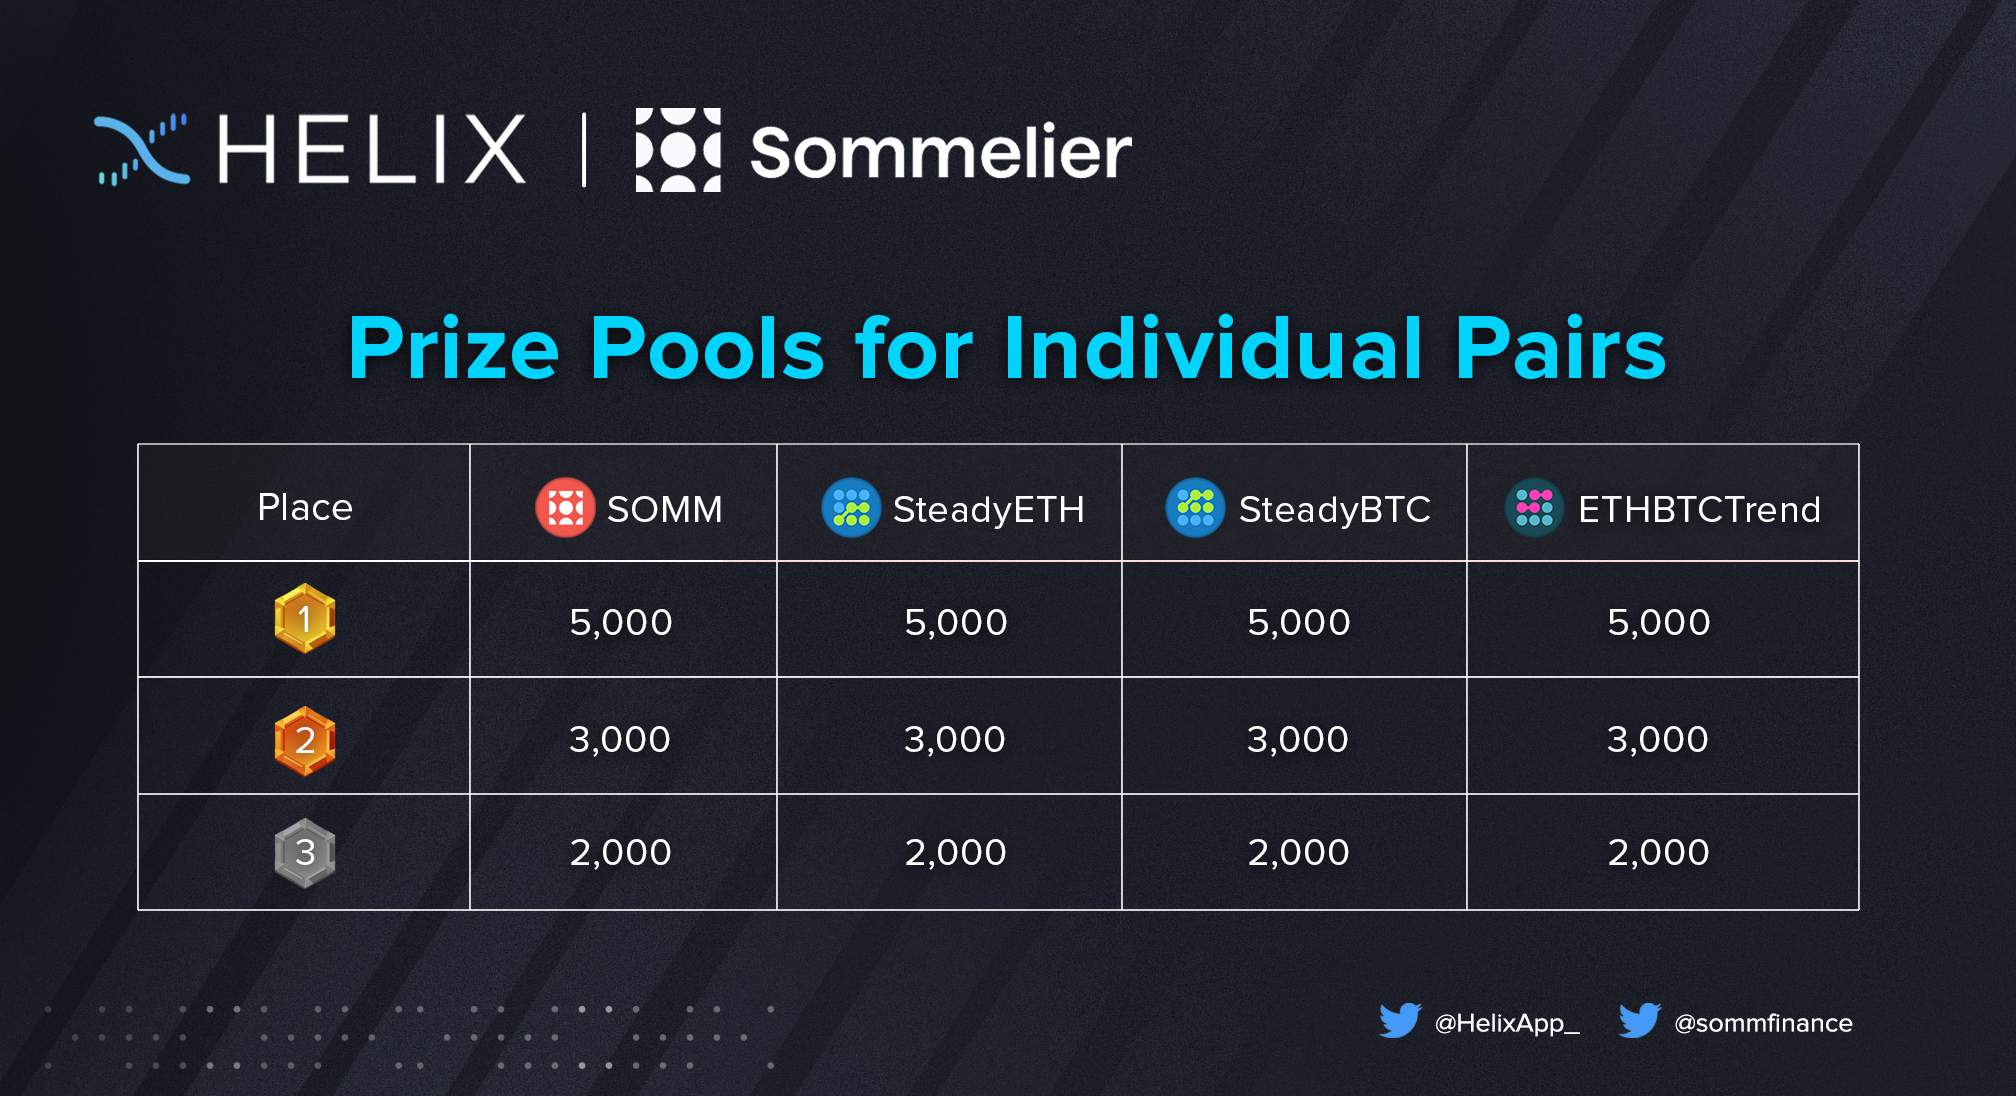 Sommelier-Prize-Pools-for-Individual-Pairs1-1.jpg